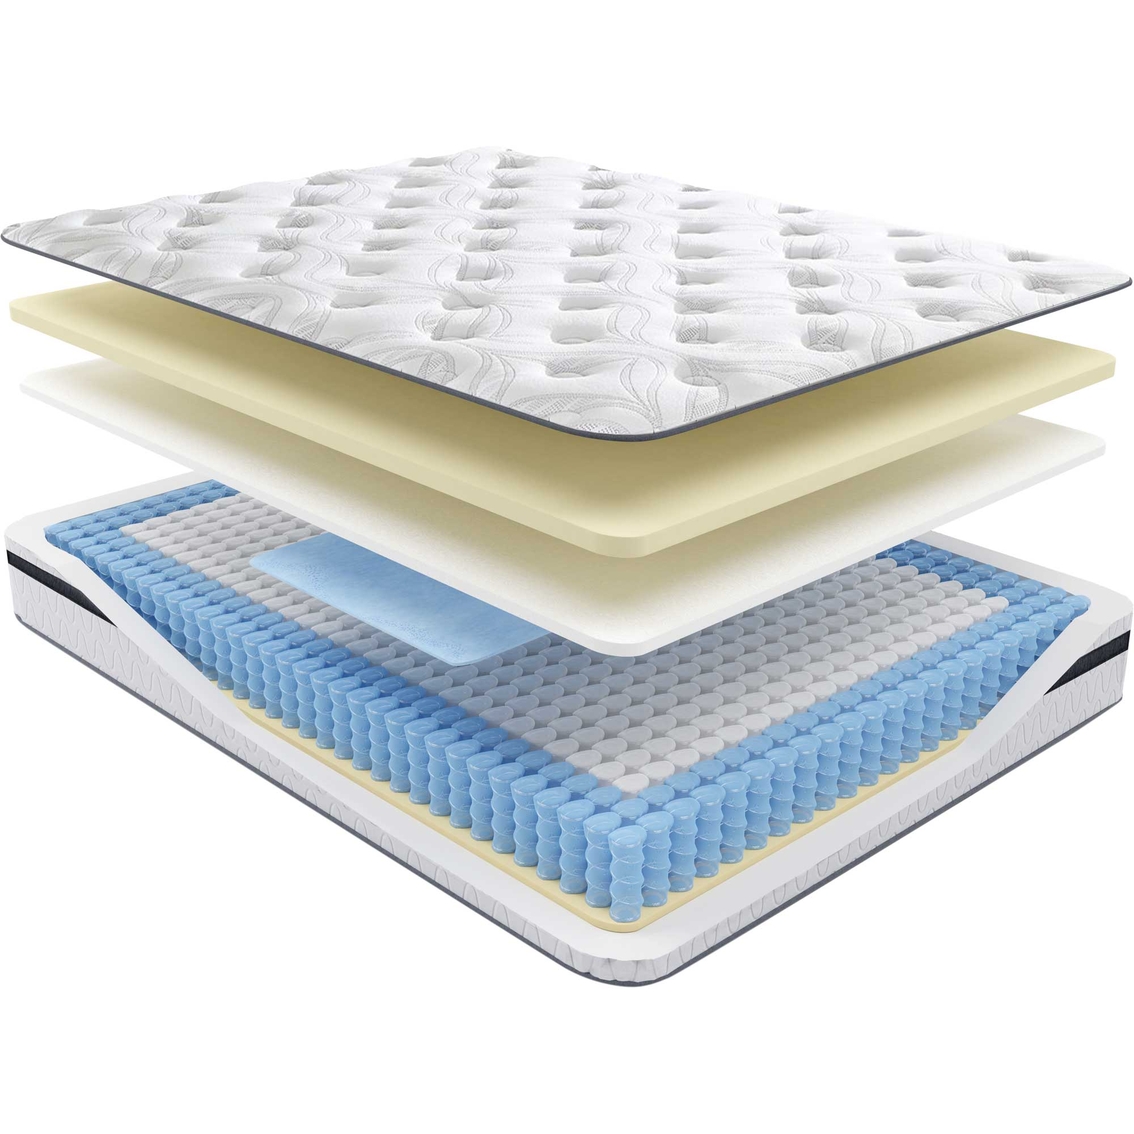 Peak by Ashley 10 in. Pocketed Hybrid Mattress - Image 2 of 5